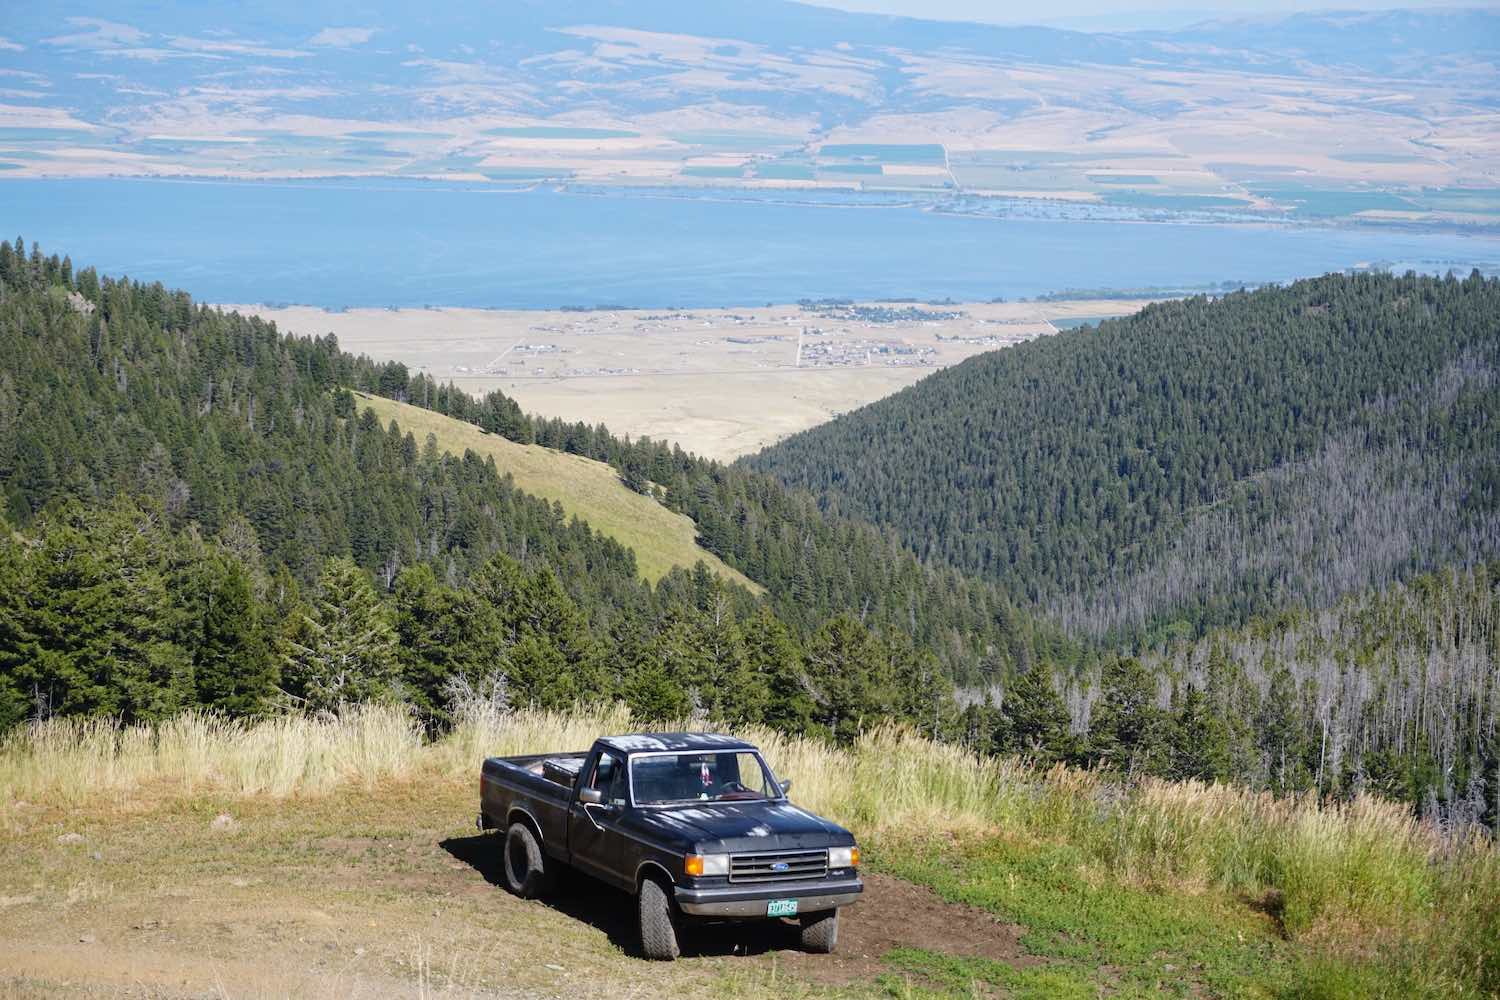 1988 Ford F-150 classic old truck parked on a mountainside in Montana, a lake visible in the background.